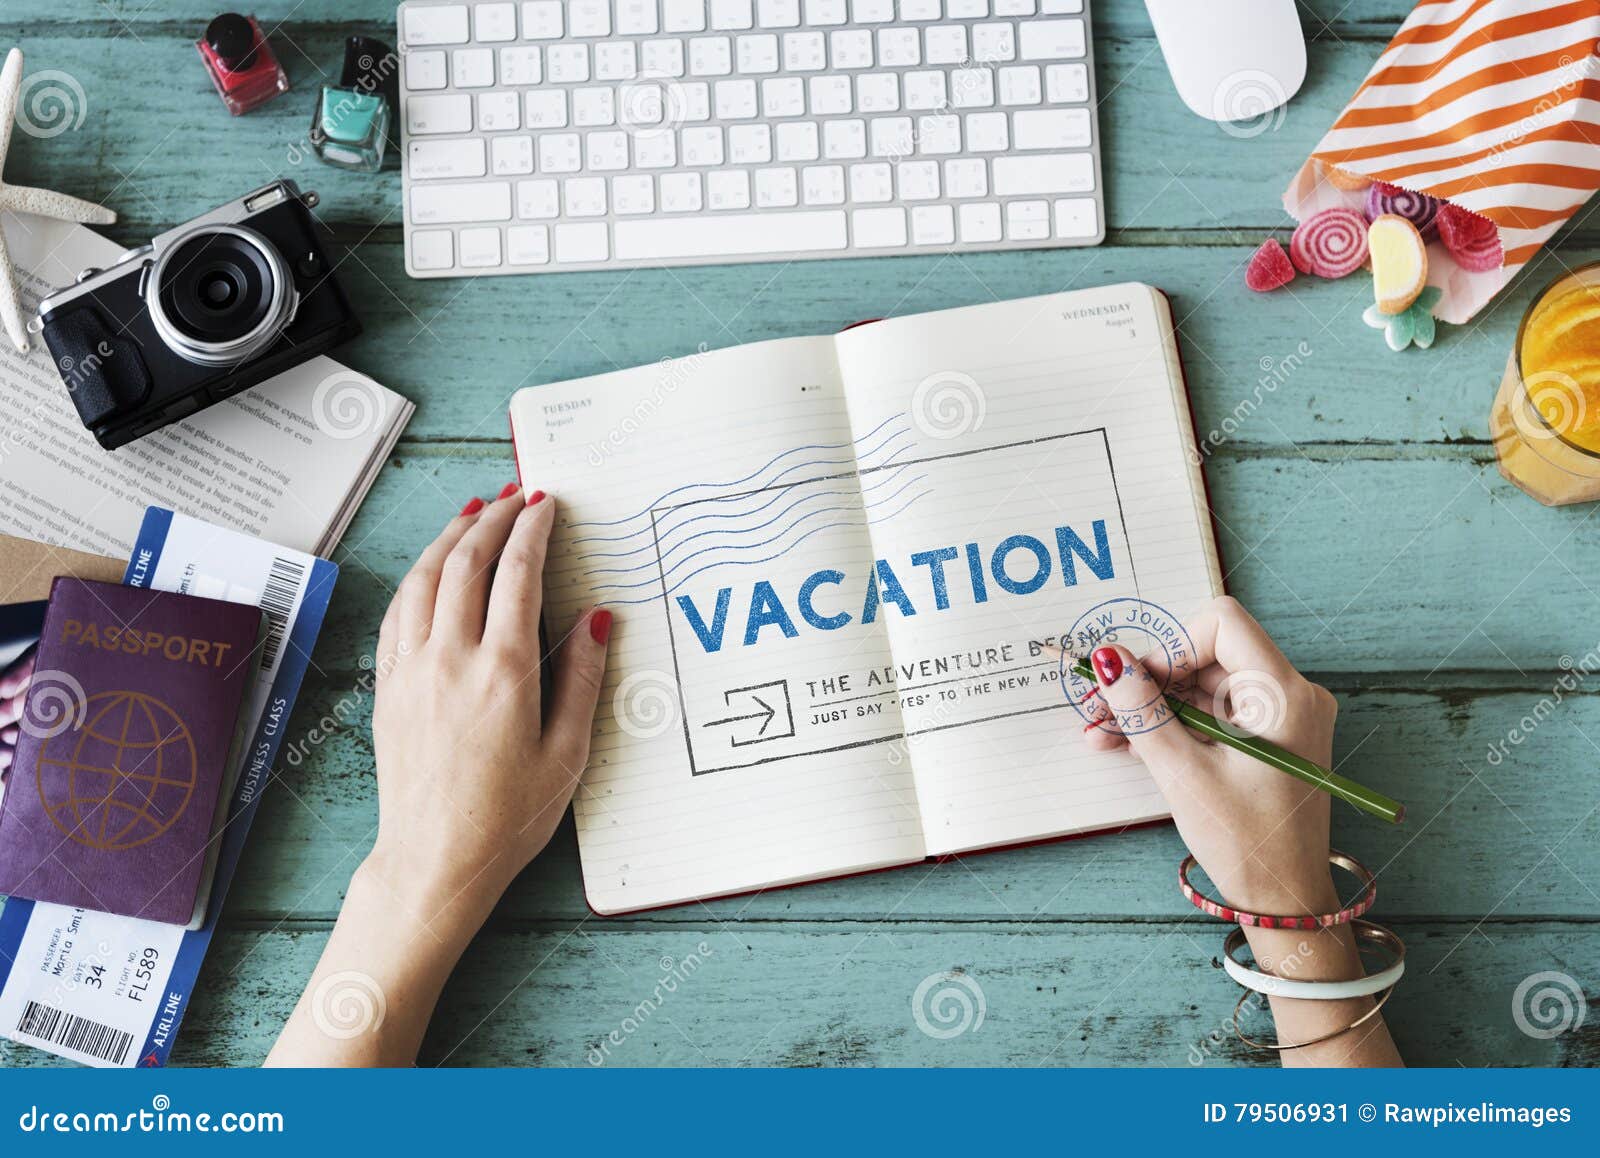 holiday travel voyage wanderlust vacation concept